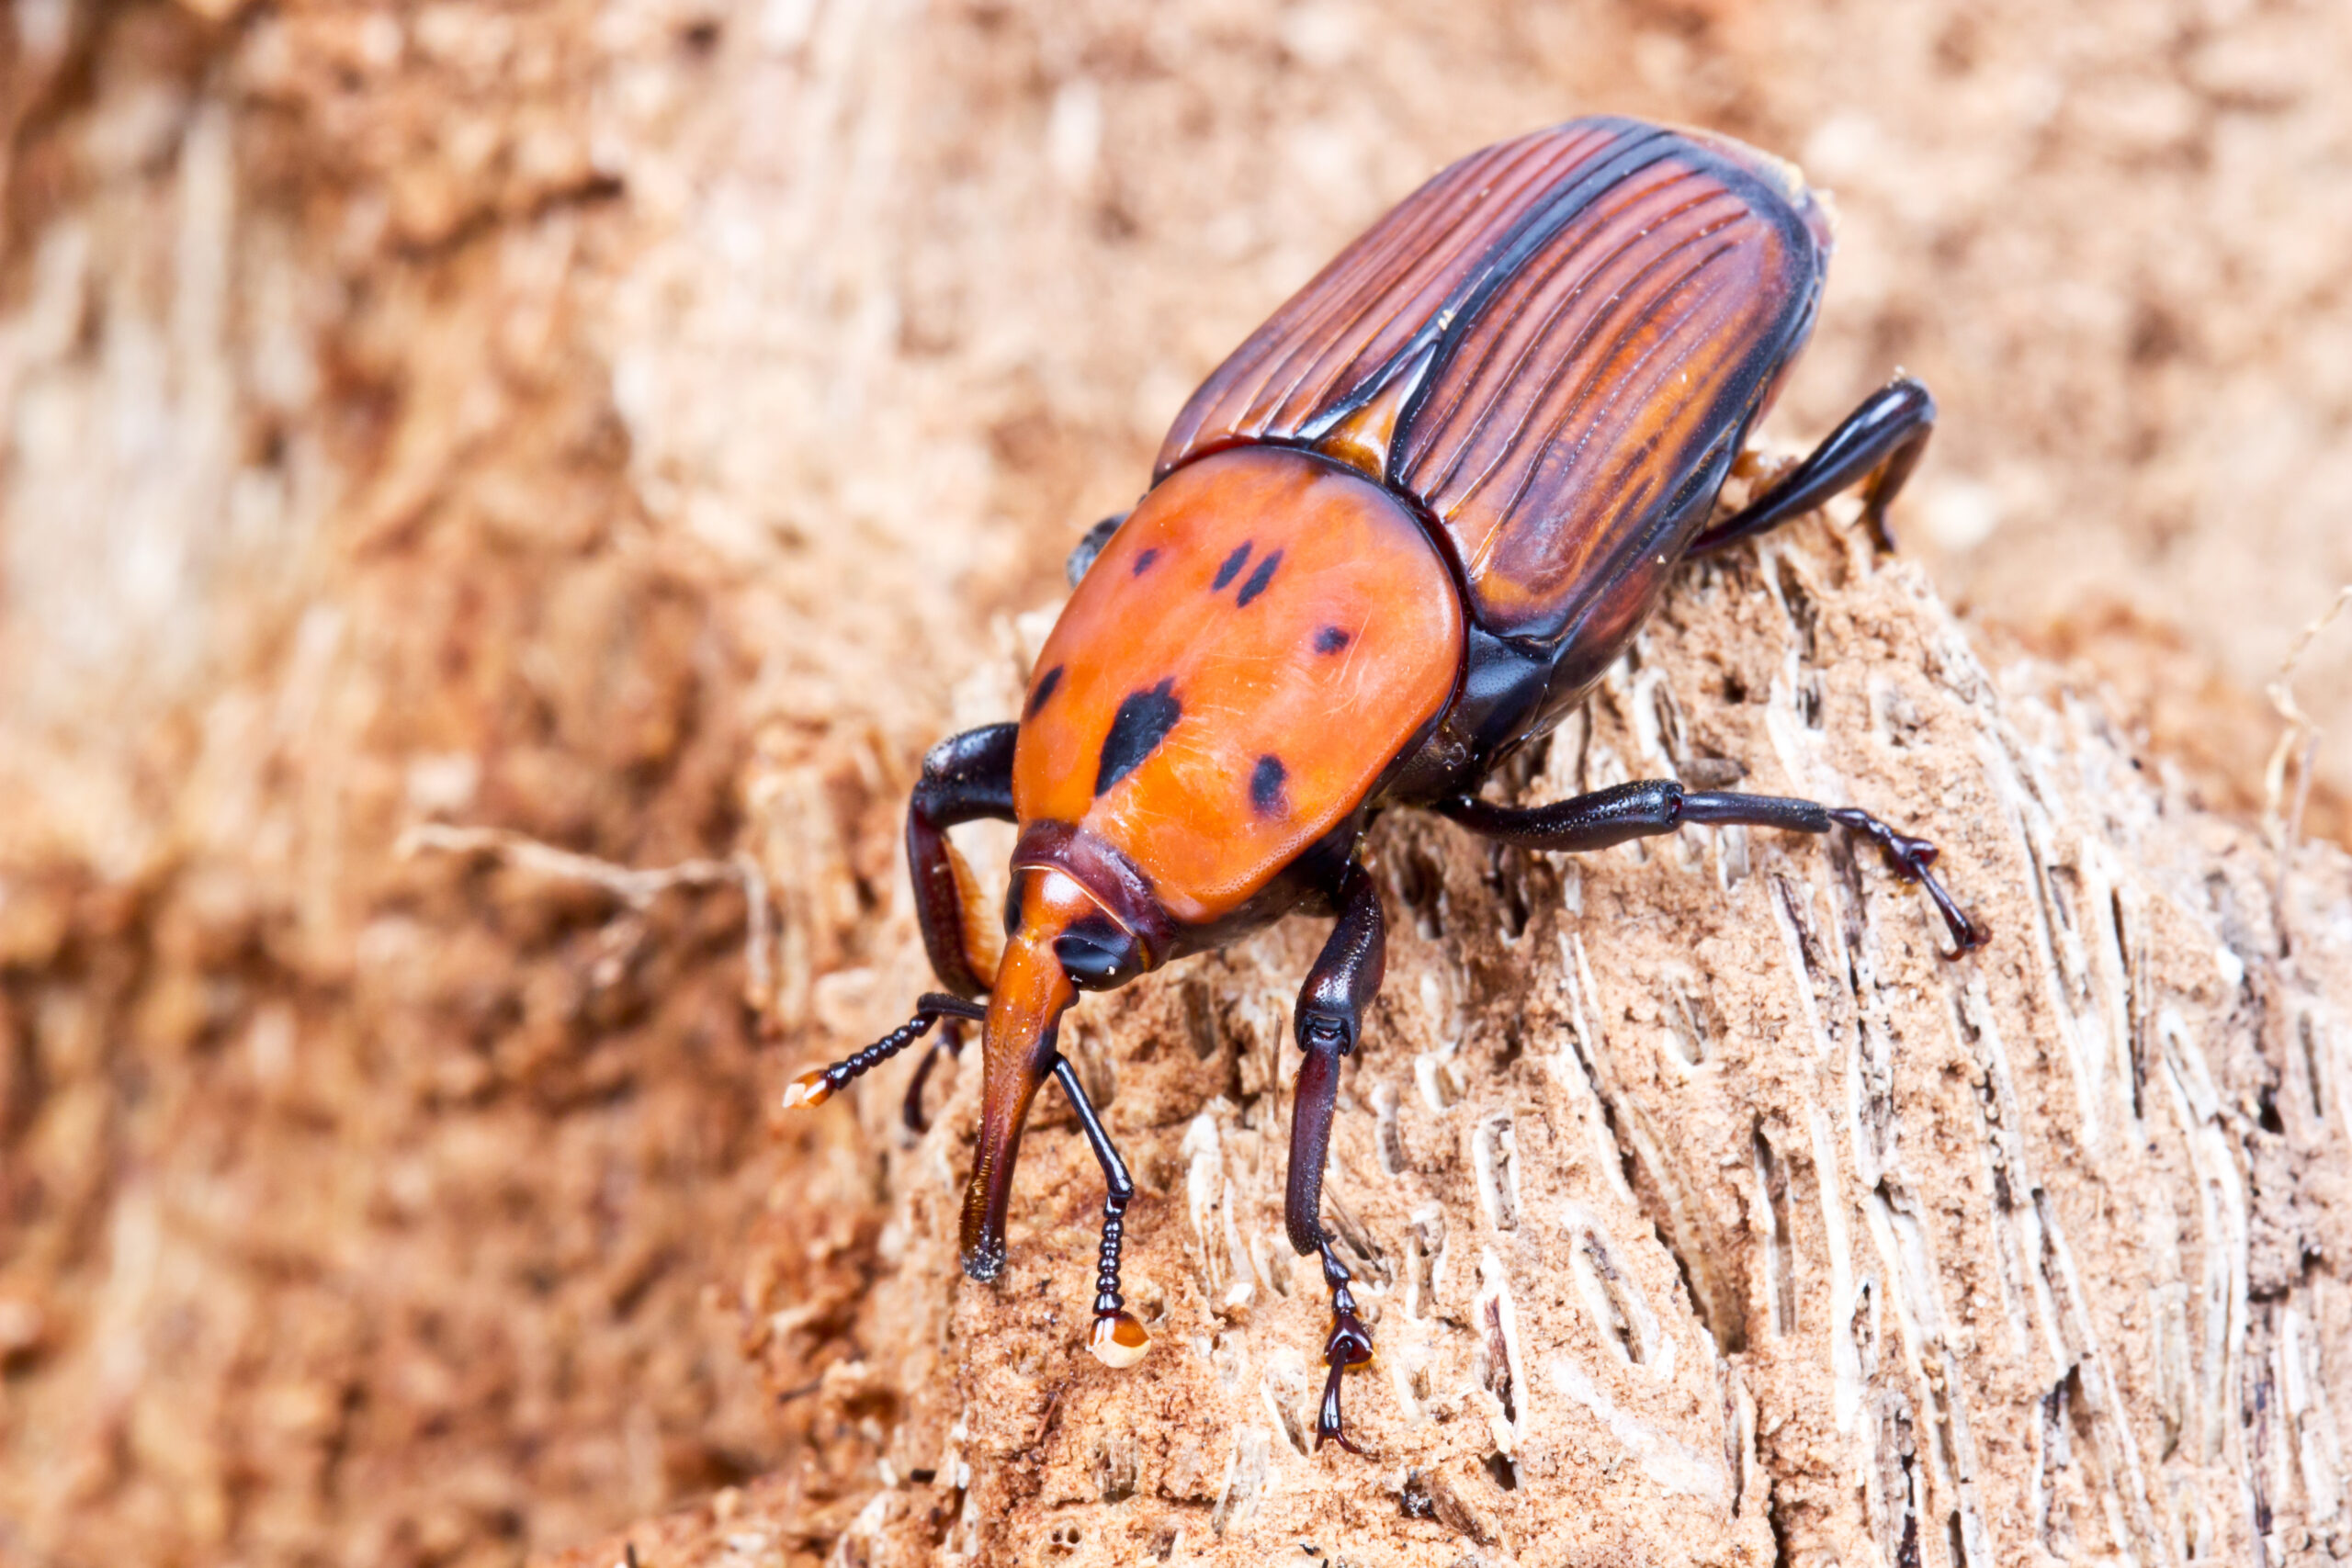 A close-up photo of a Red Palm Weevil, a type of beetle known for its elongated snout and red-brown exoskeleton. The weevil is shown resting on a tree trunk with its wings folded, and its segmented body and long antennae are visible.